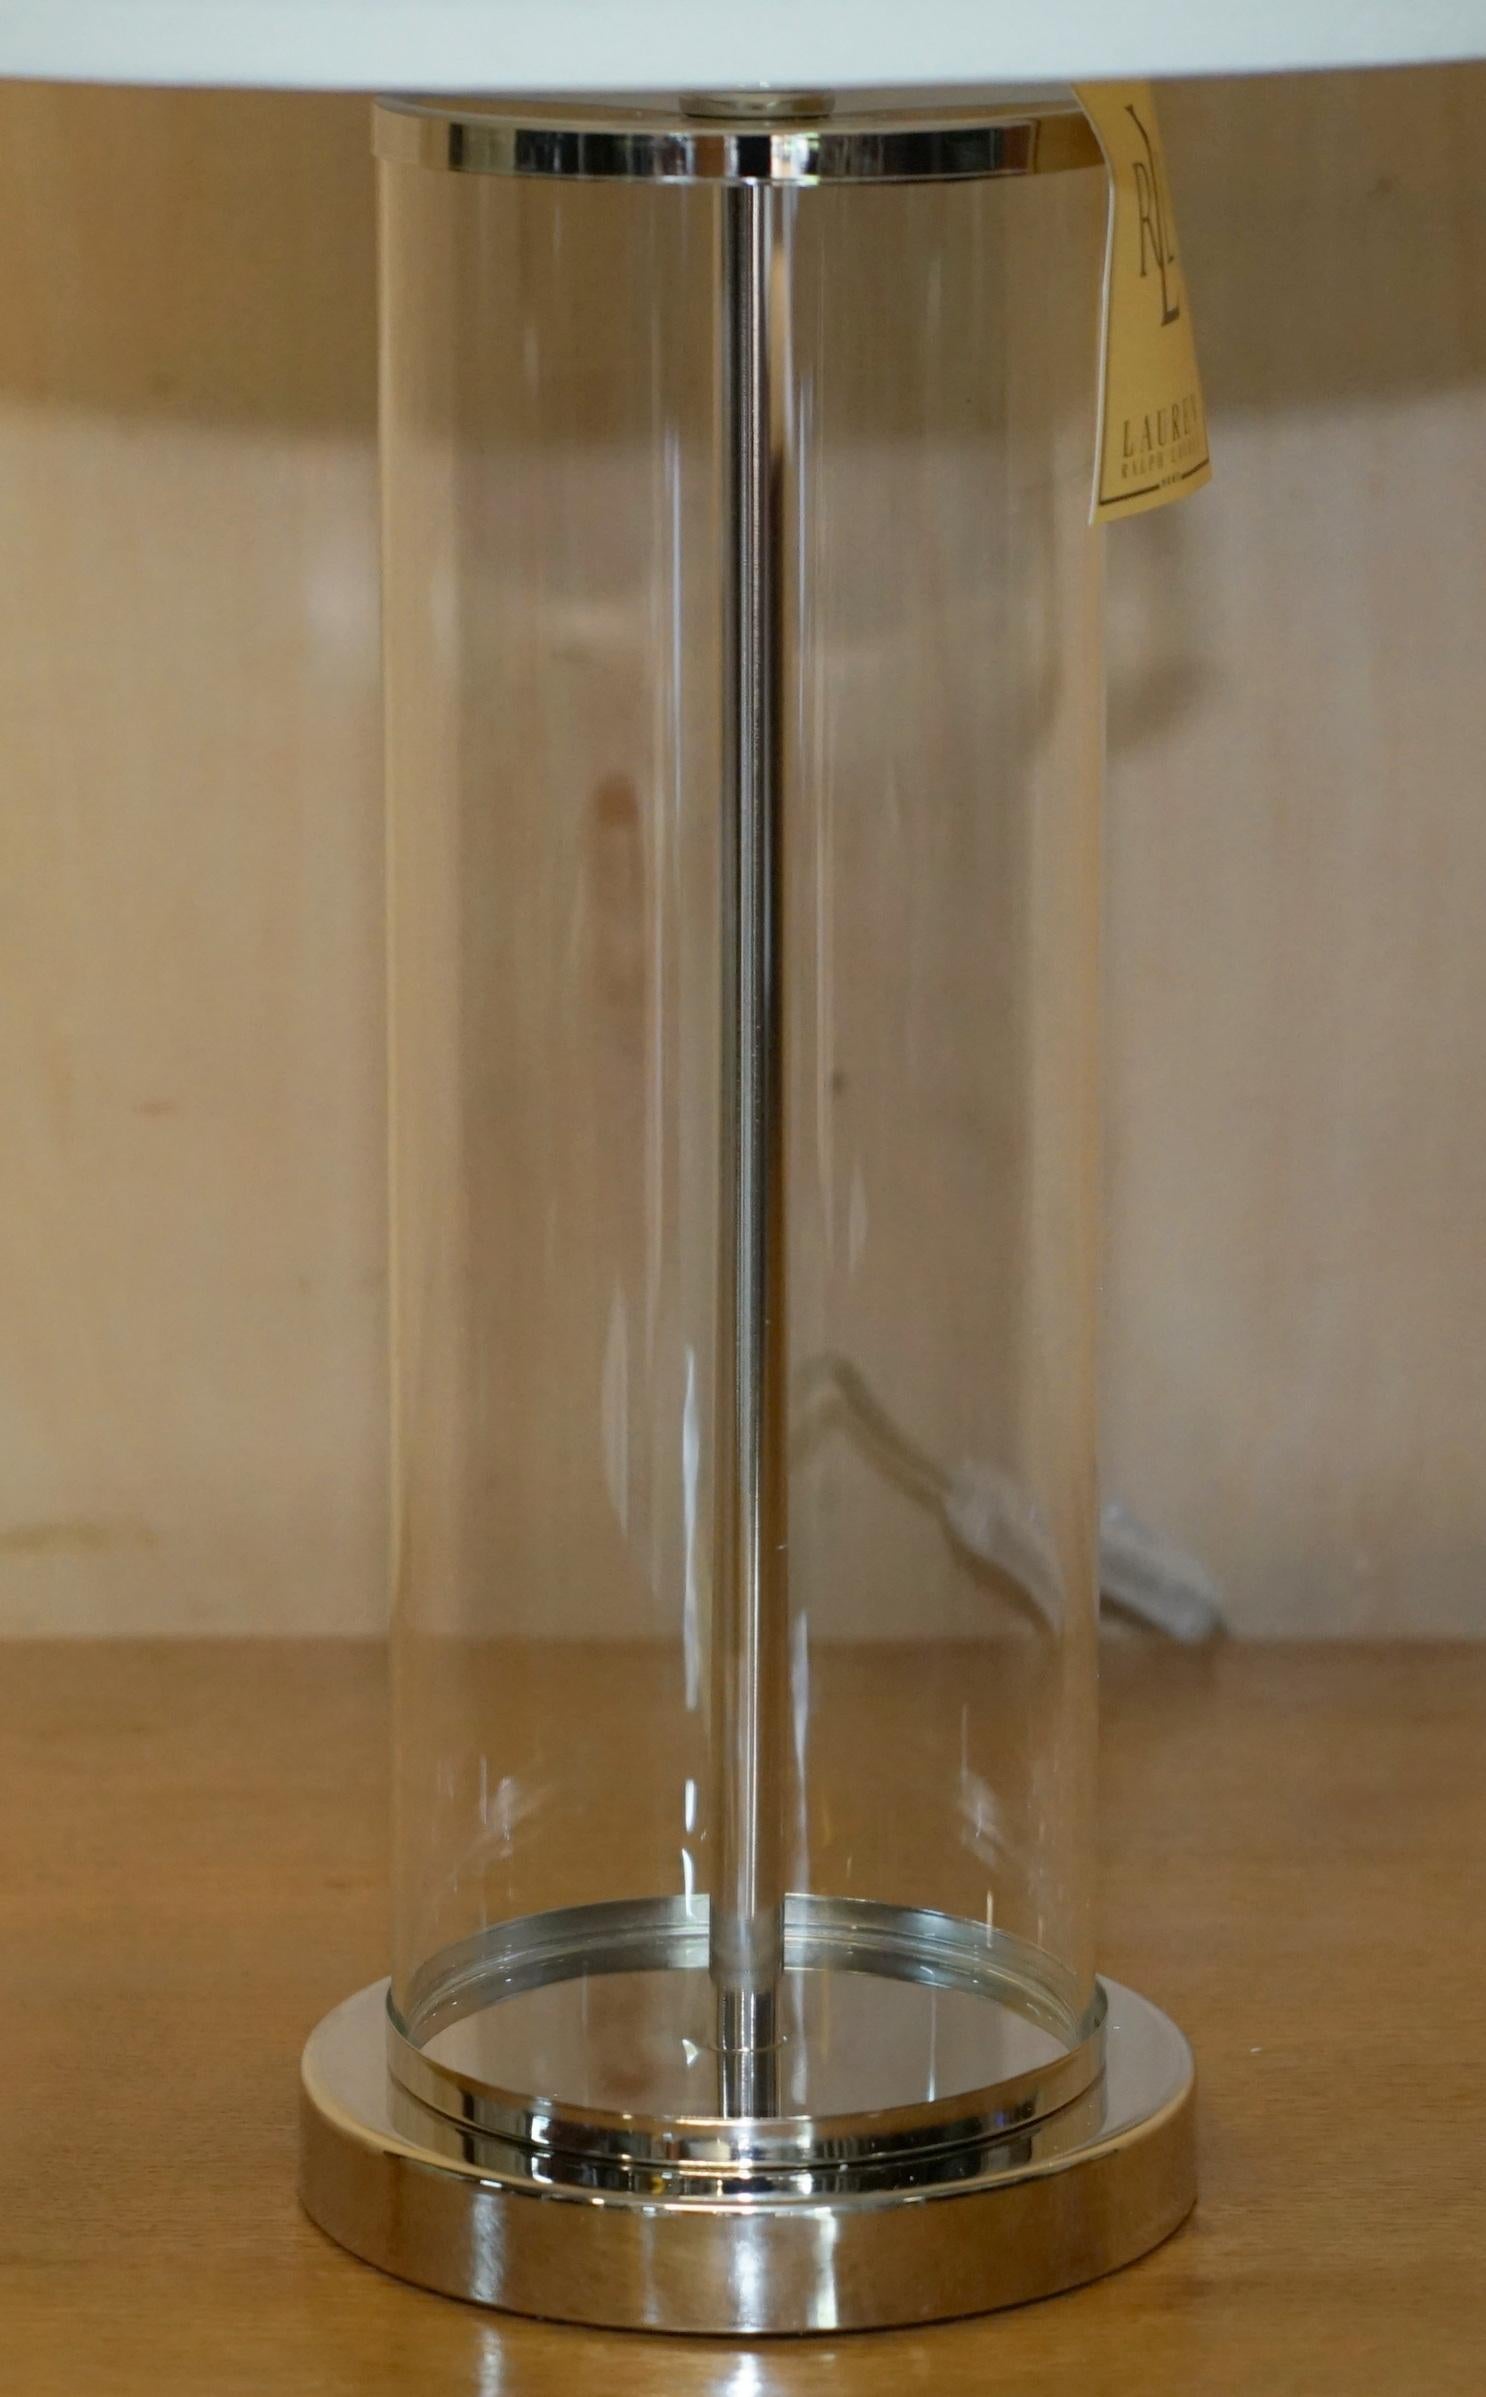 Glass 1 OF 2 BRAND NEW IN THE BOX RALPH LAUREN SiLVER STORM LANTERN GLASS TABLE LAMPS For Sale